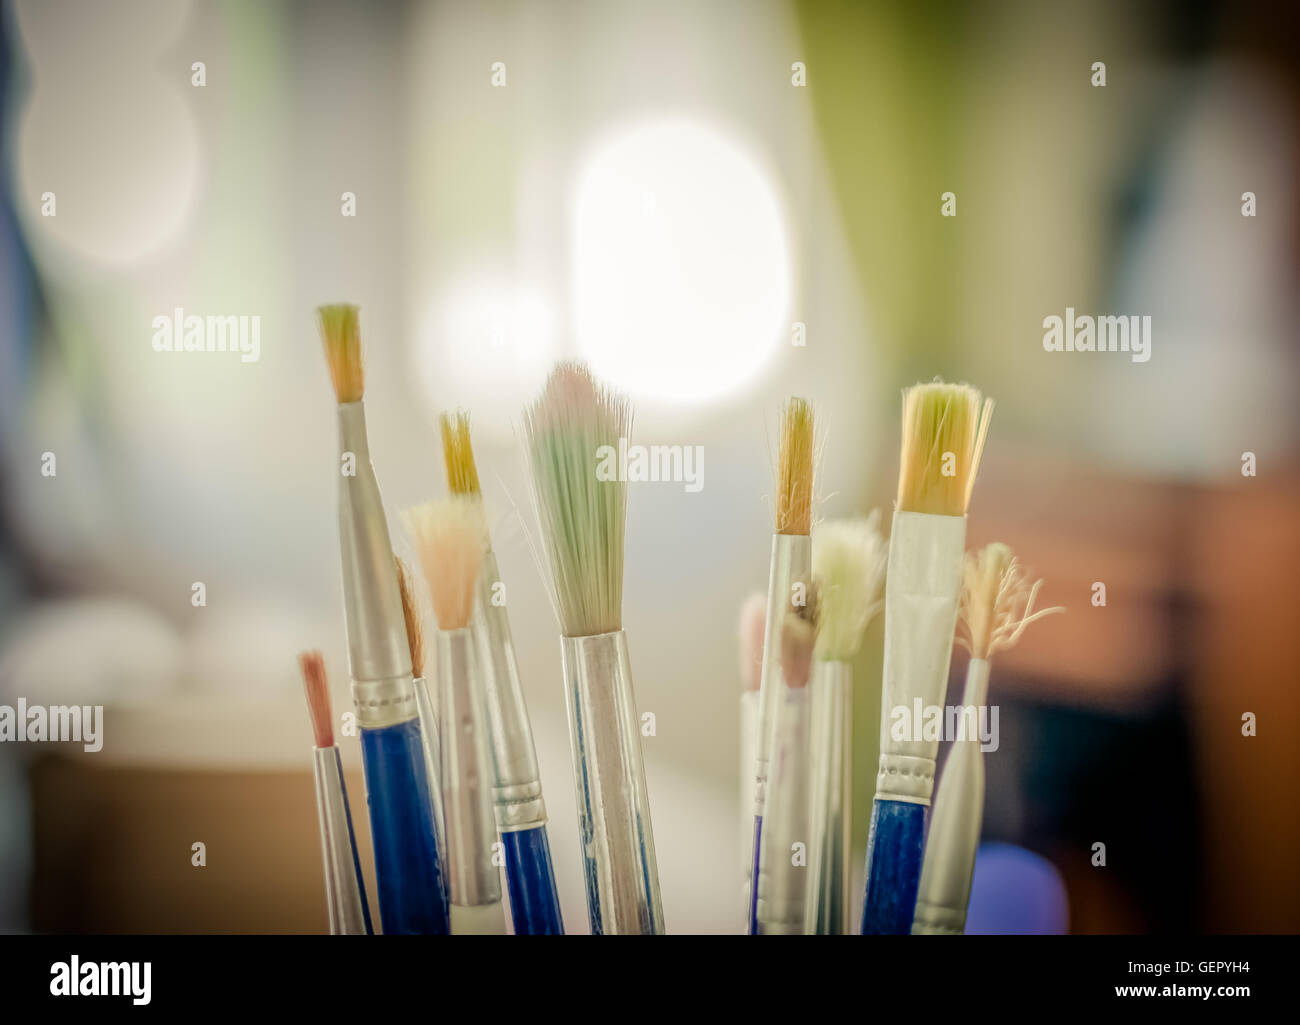 drawing paint brushes Stock Photo